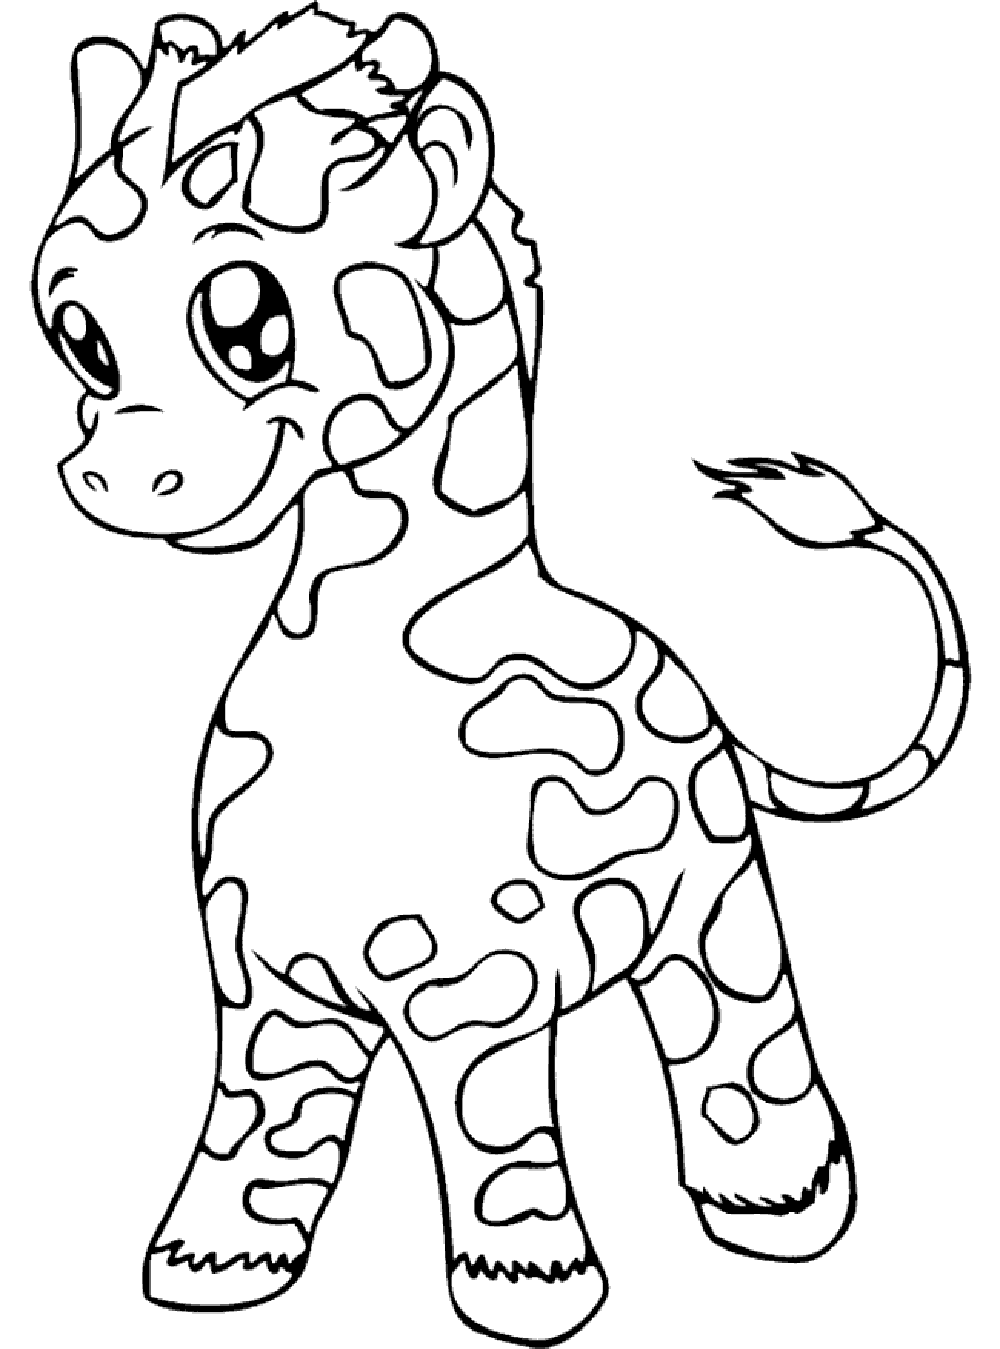 Free Giraffes coloring page to print and color, for kids